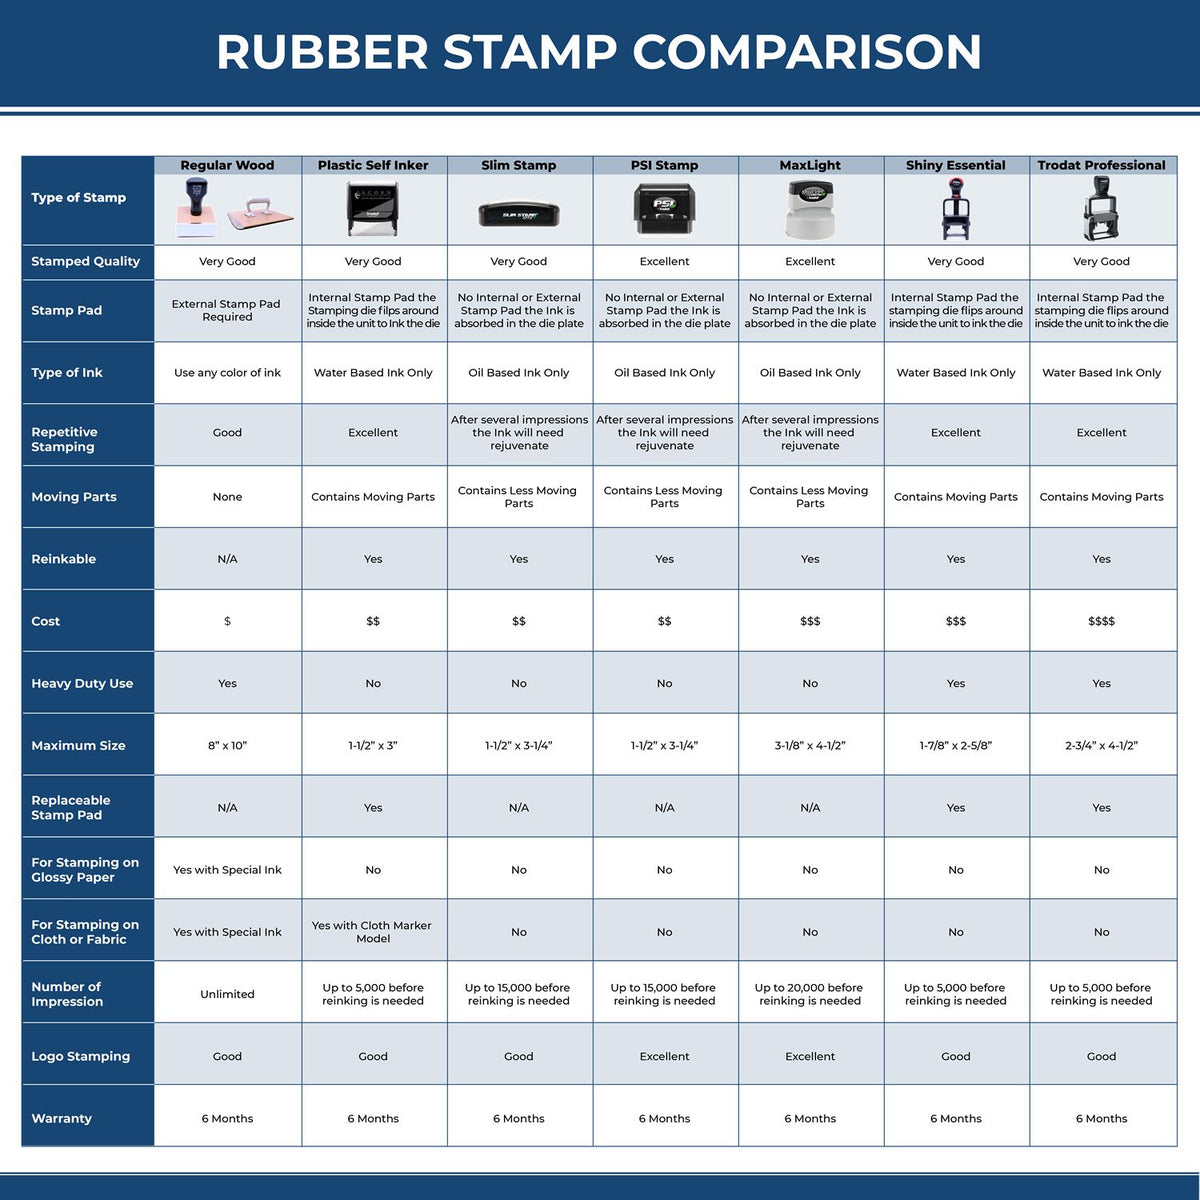 Large Pre-Inked Late with Border Stamp 5624SLIM Rubber Stamp Comparison